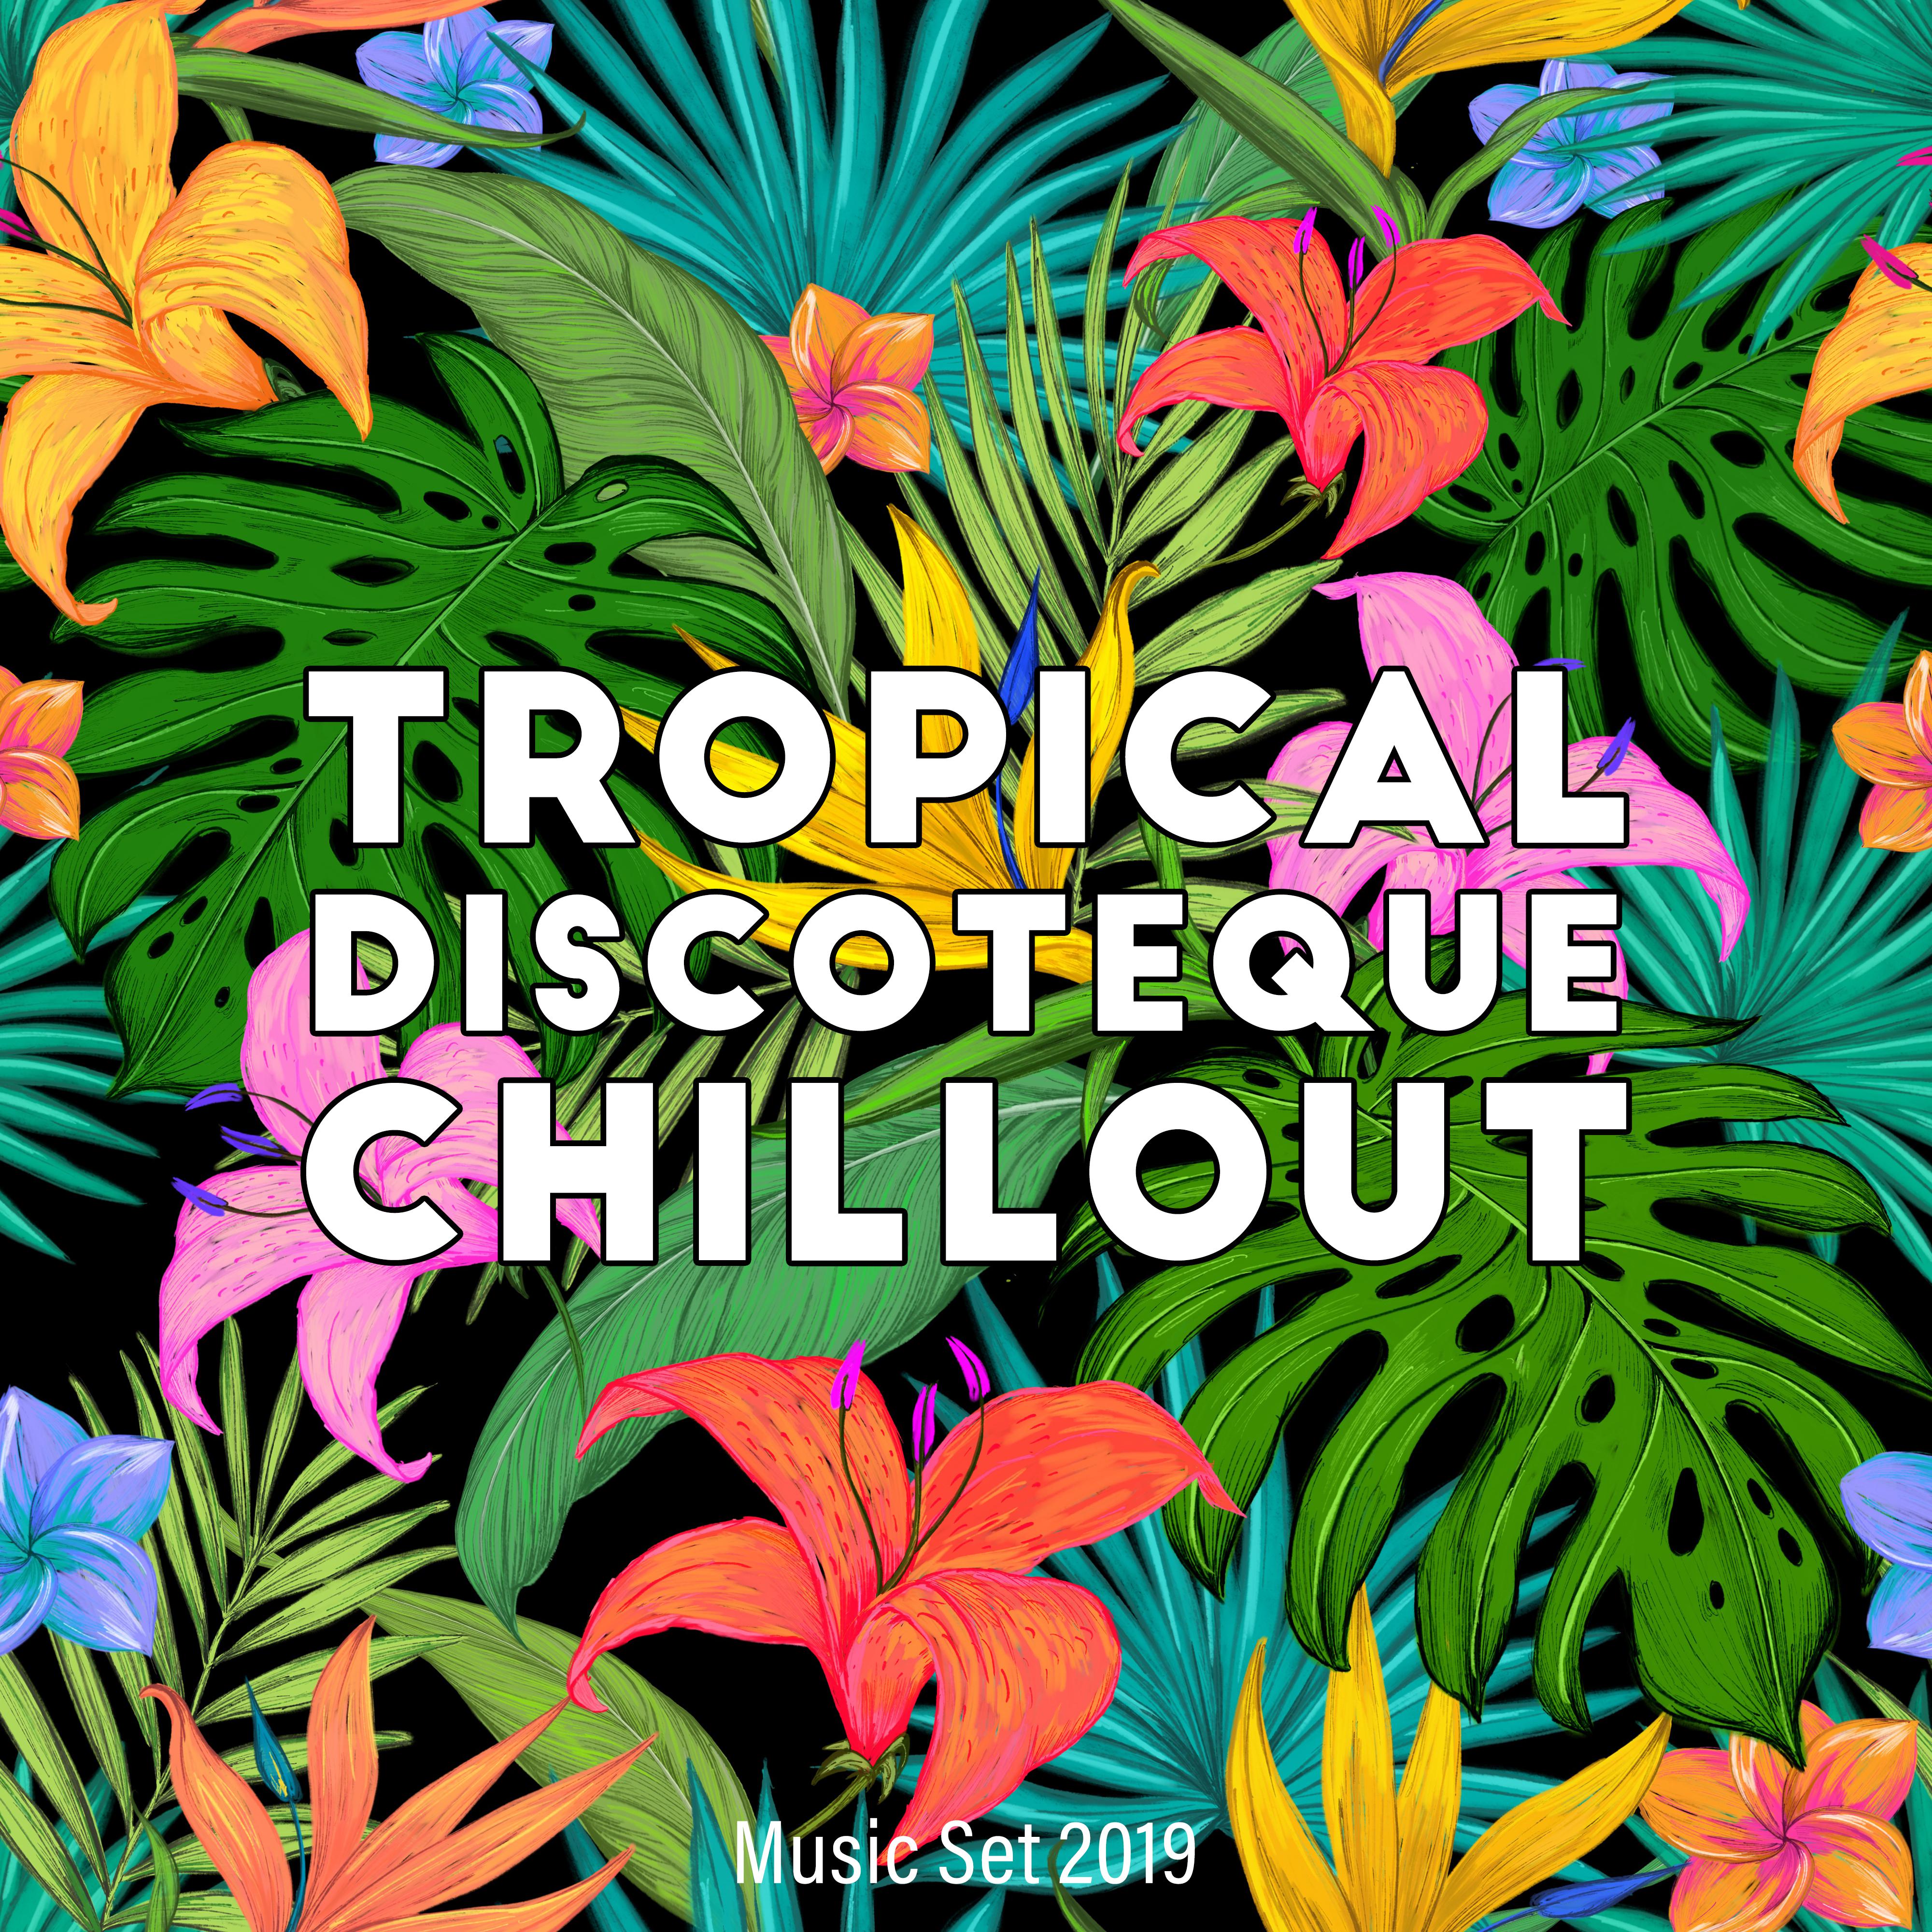 Tropical Discoteque Chillout Music Set 2019 – Slow Electronic Chill Out Music, Holiday Relaxation Rhythms, Low BPM Party Beats